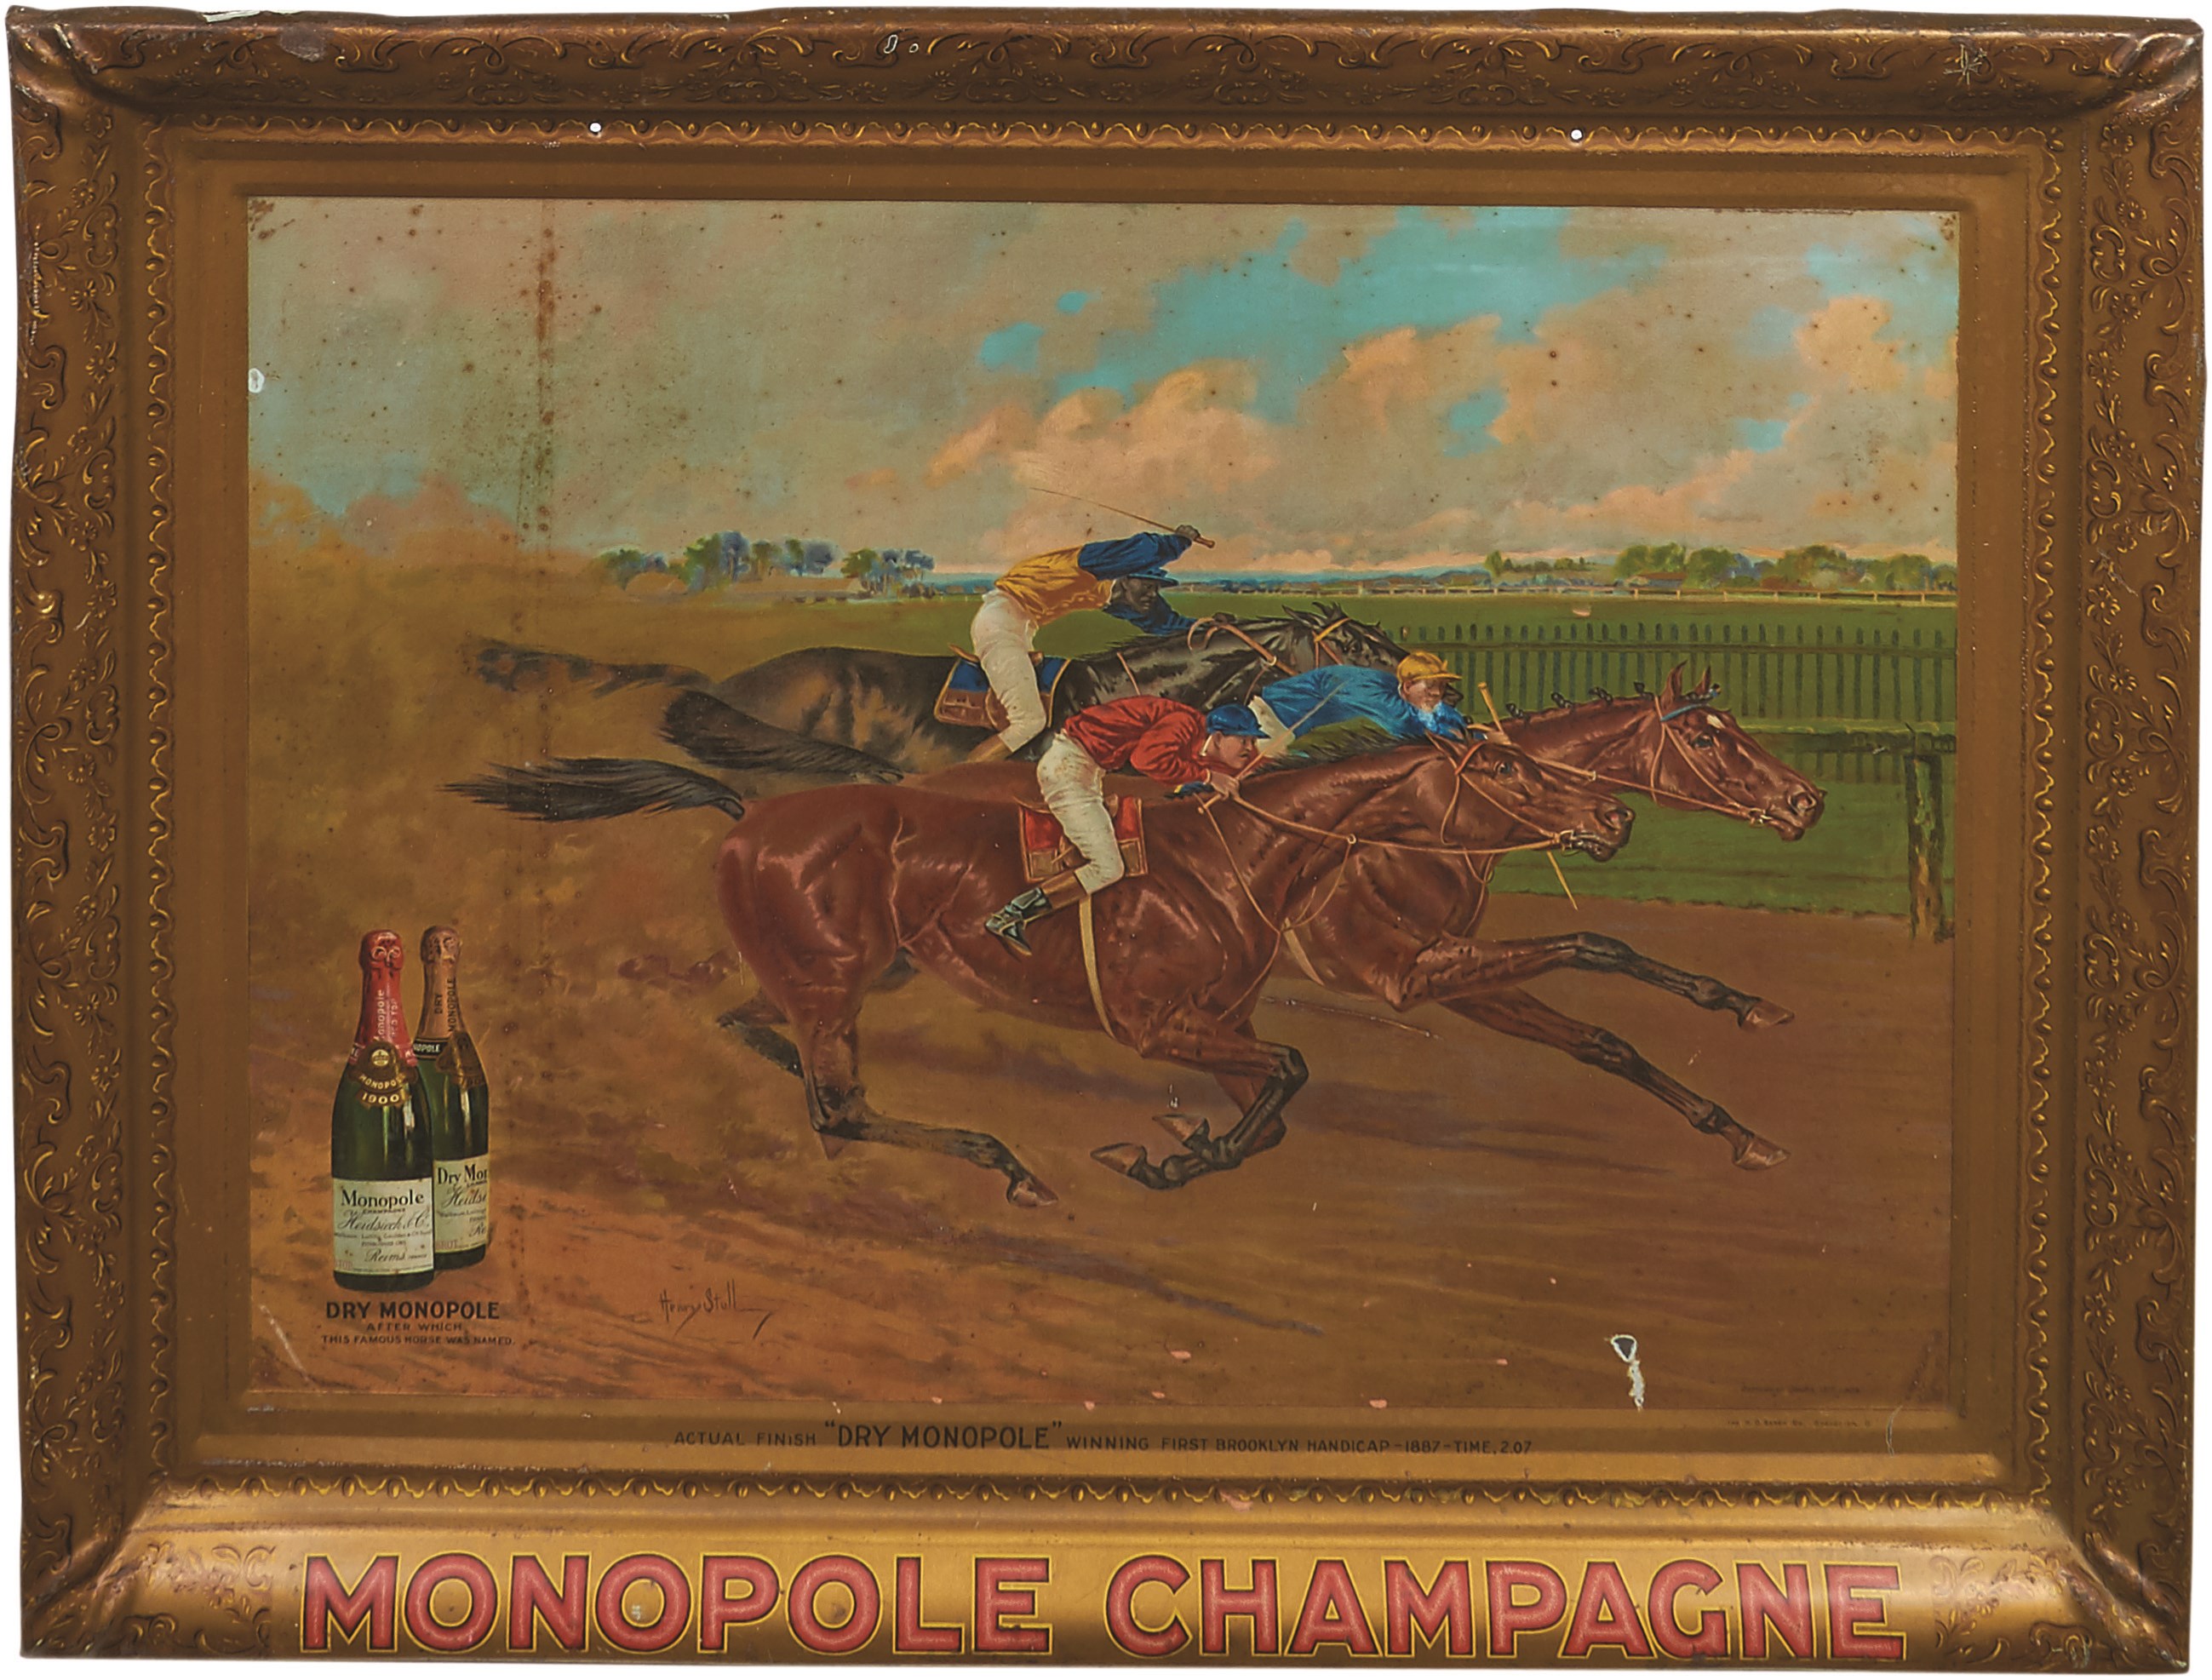 Early Monopole Champagne Tin Advertising Sign by Henry Stull